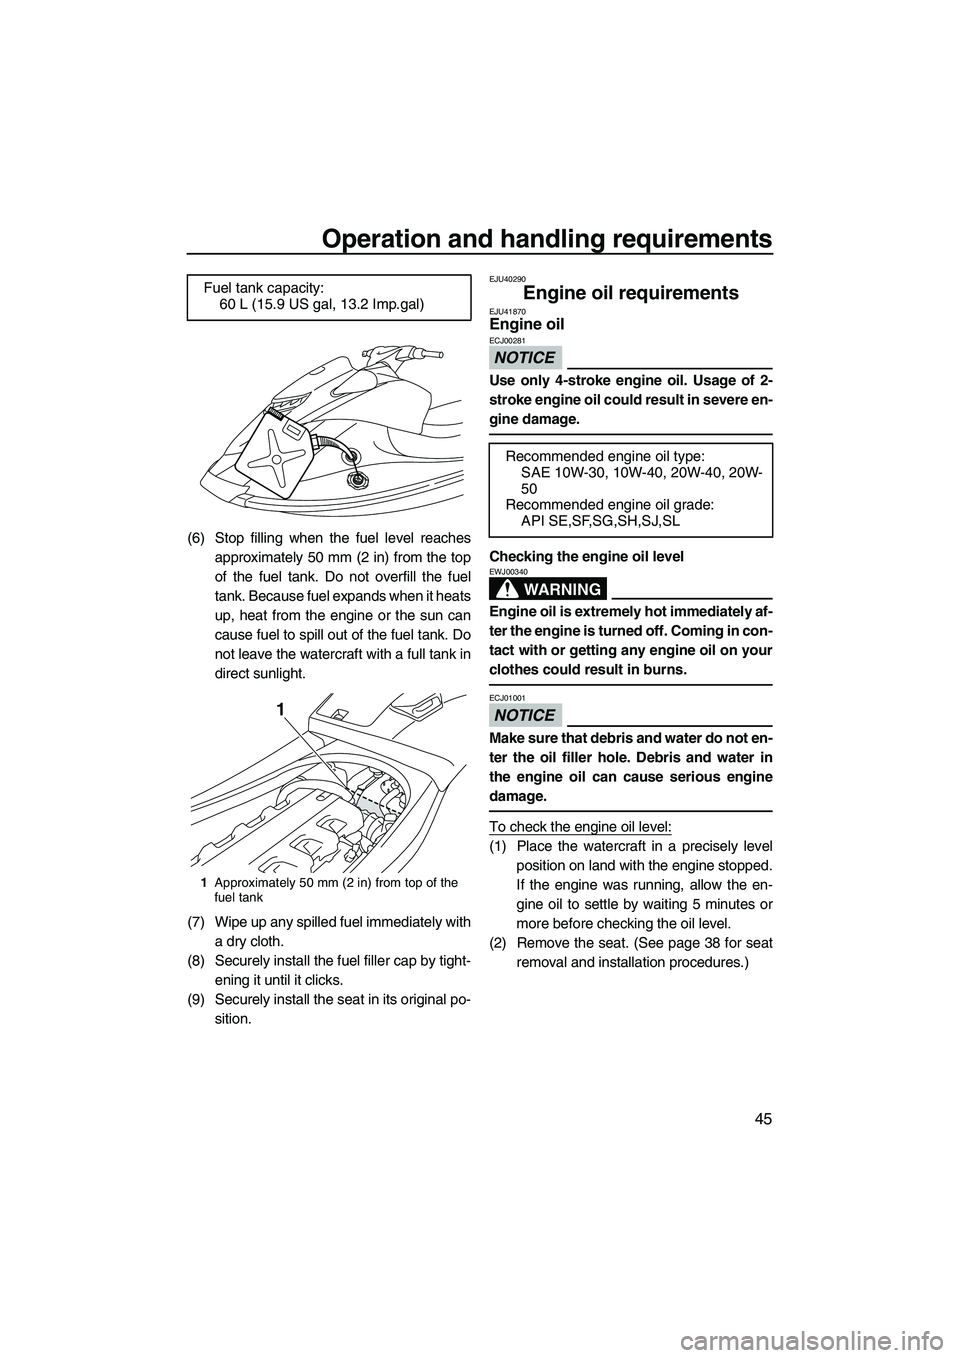 YAMAHA VXS 2013  Owners Manual Operation and handling requirements
45
(6) Stop filling when the fuel level reachesapproximately 50 mm (2 in) from the top
of the fuel tank. Do not overfill the fuel
tank. Because fuel expands when it